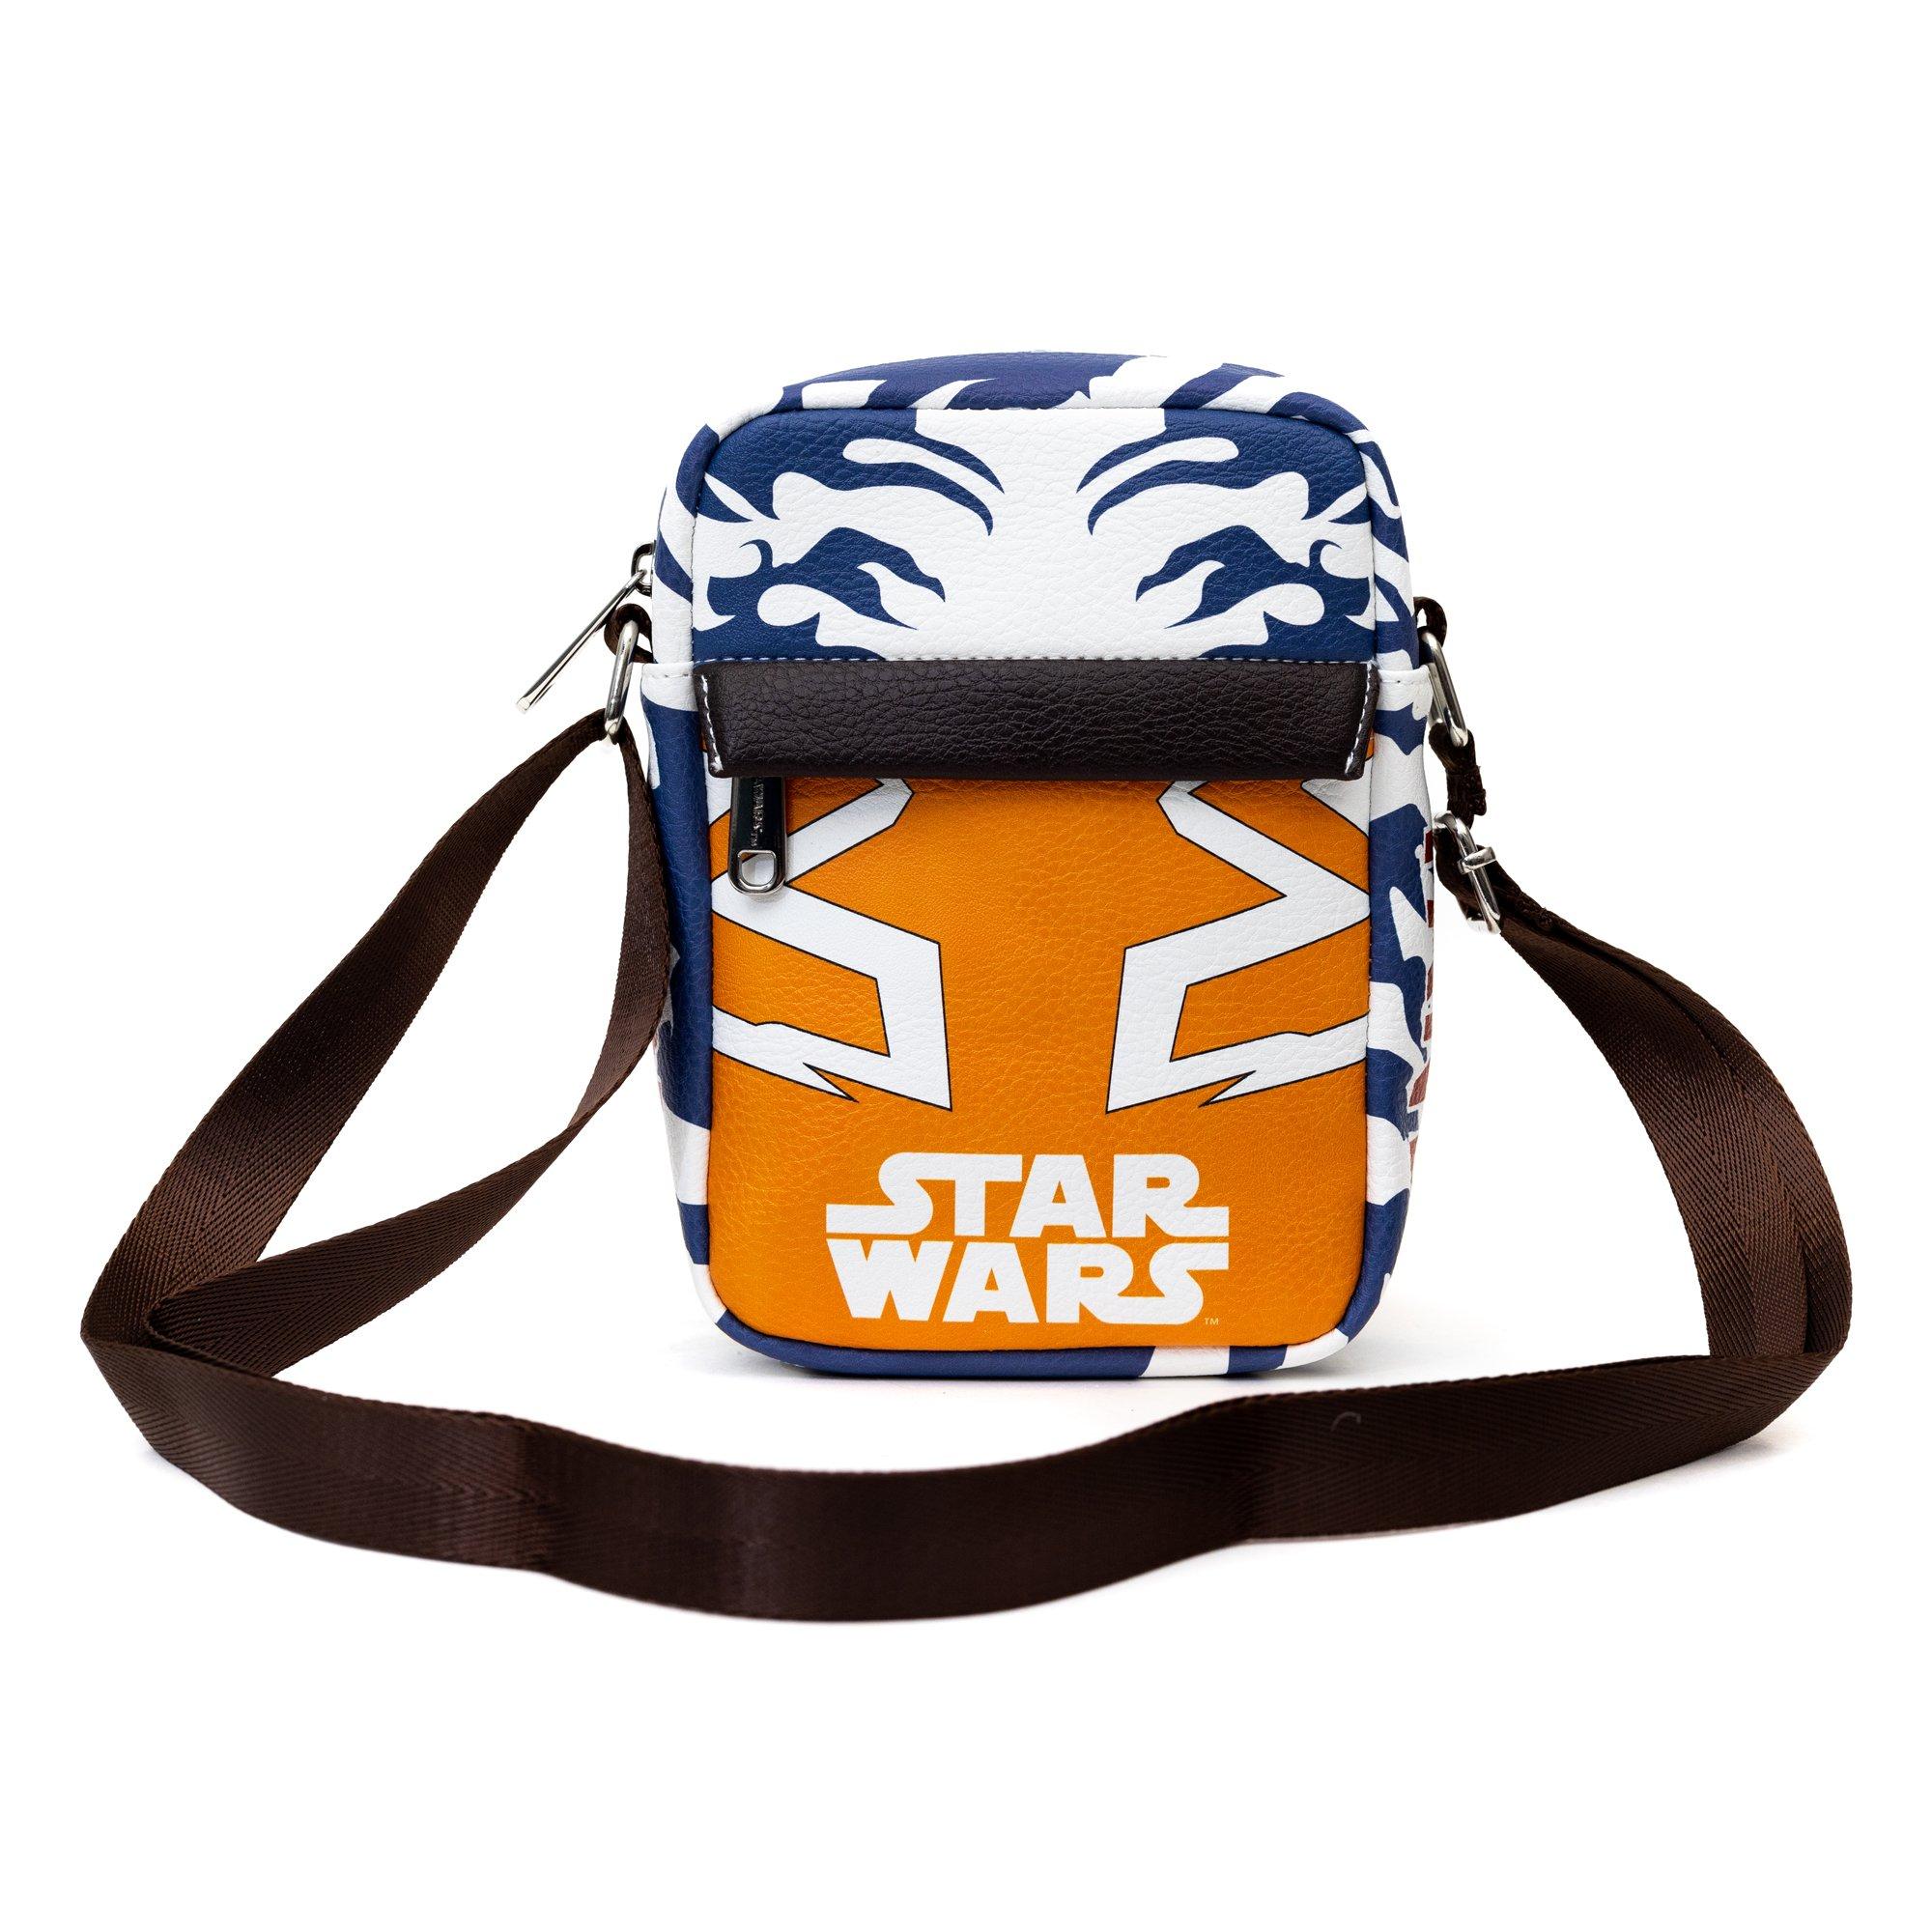 Lego Star Wars Lunch Bag with Top Handle and Shoulder Strap